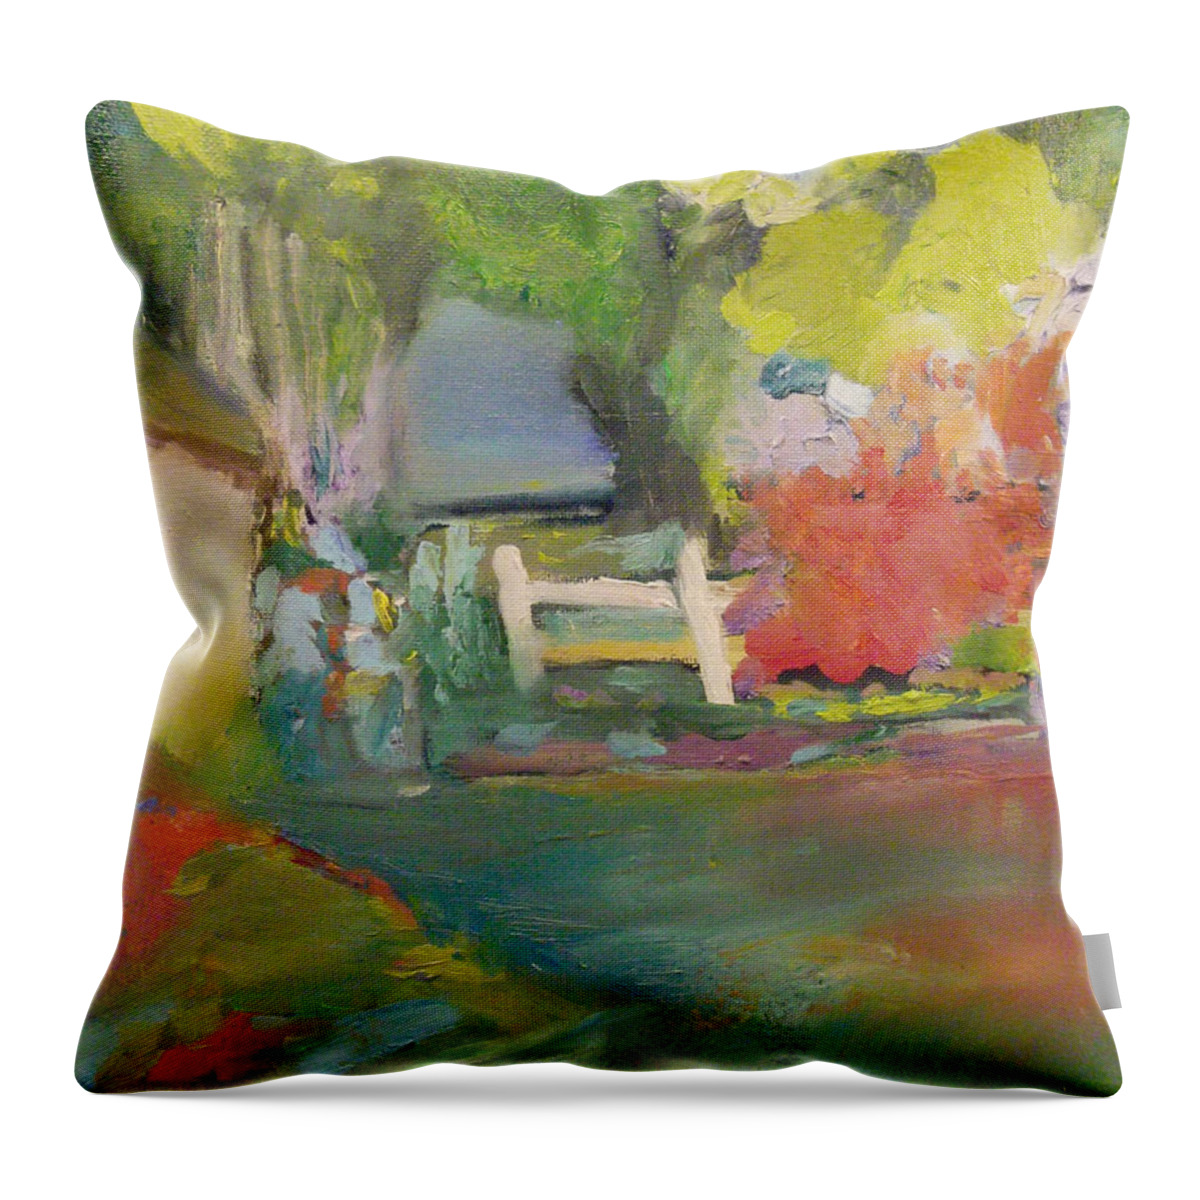 Abstract Throw Pillow featuring the painting Spring House by Susan Esbensen